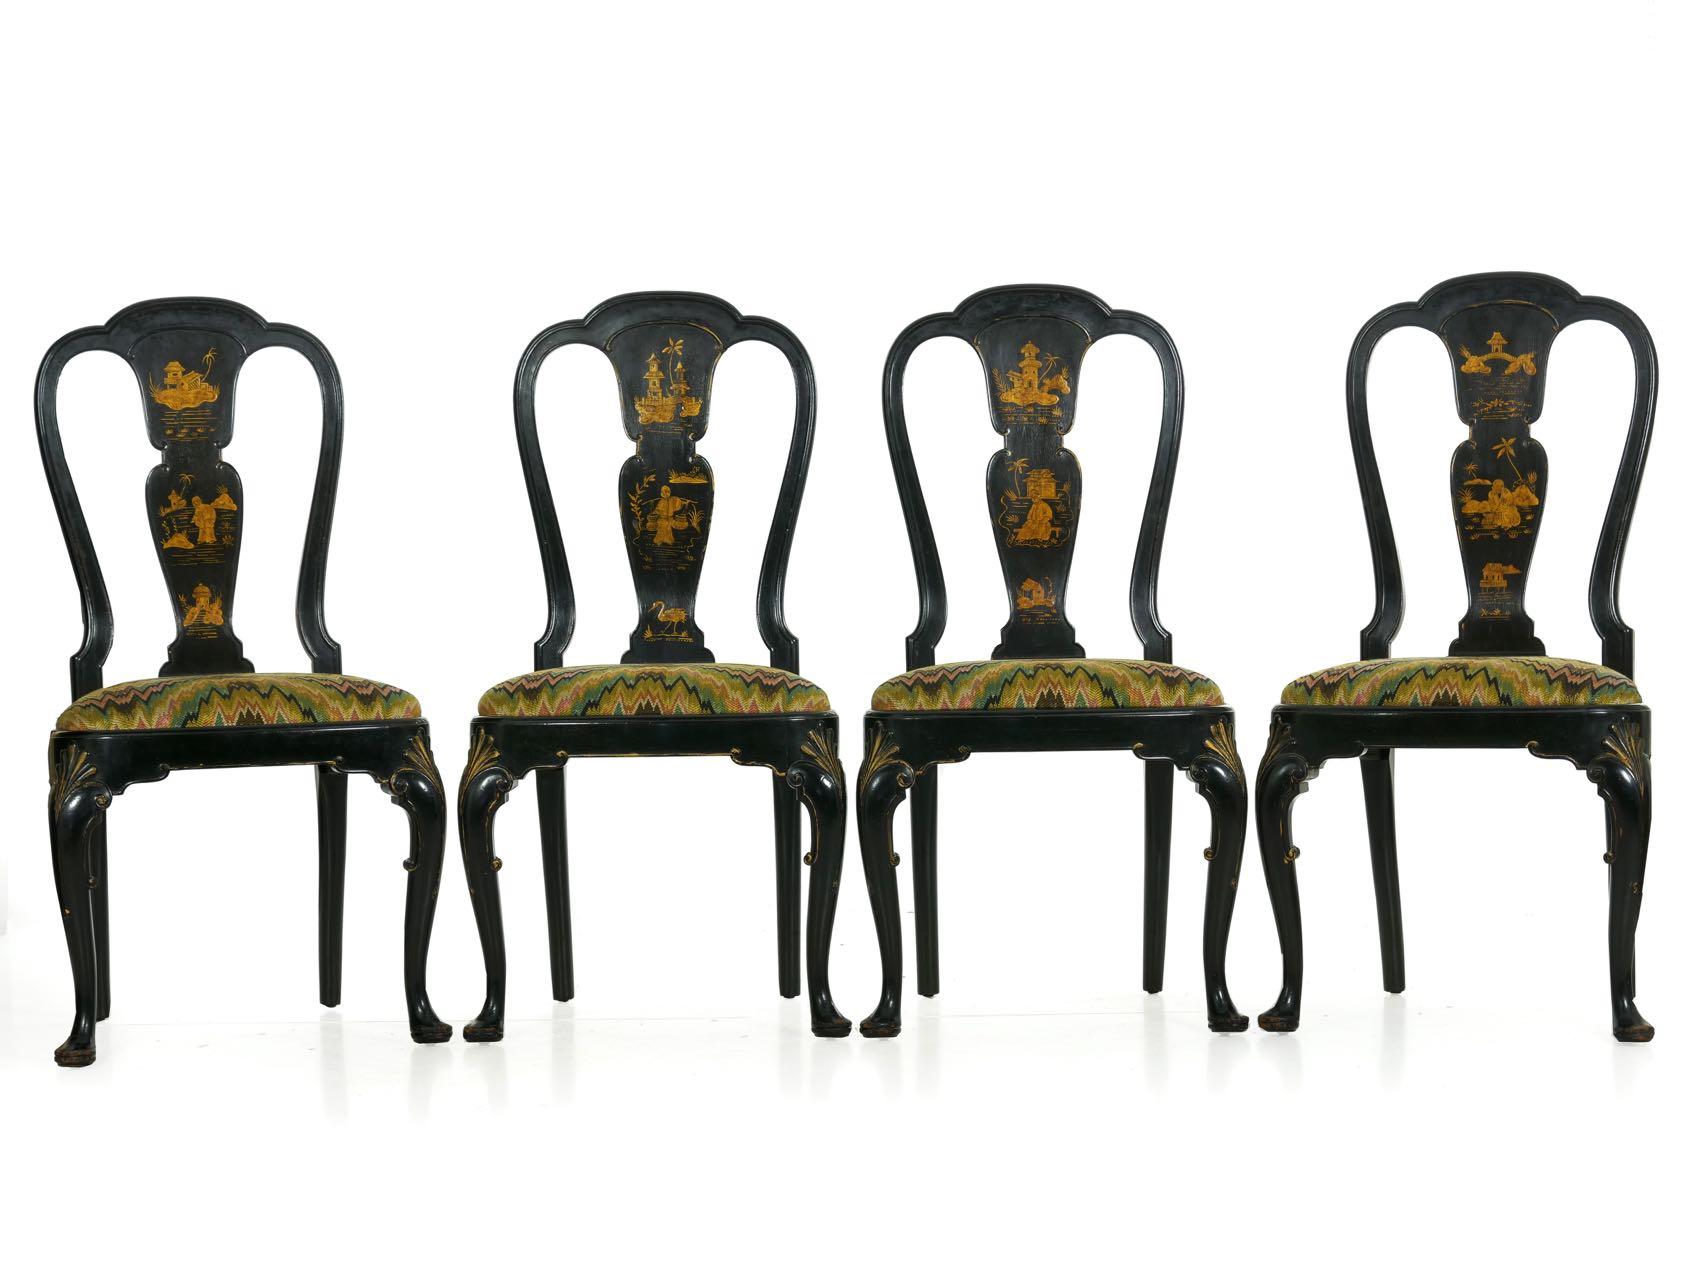 A simply superb set of eight vintage dining chairs from the first half of the 20th century, they are intricately carved and decorated in the Queen Anne or George II taste of the English originals. With delicate lines and a sinuous profile, each